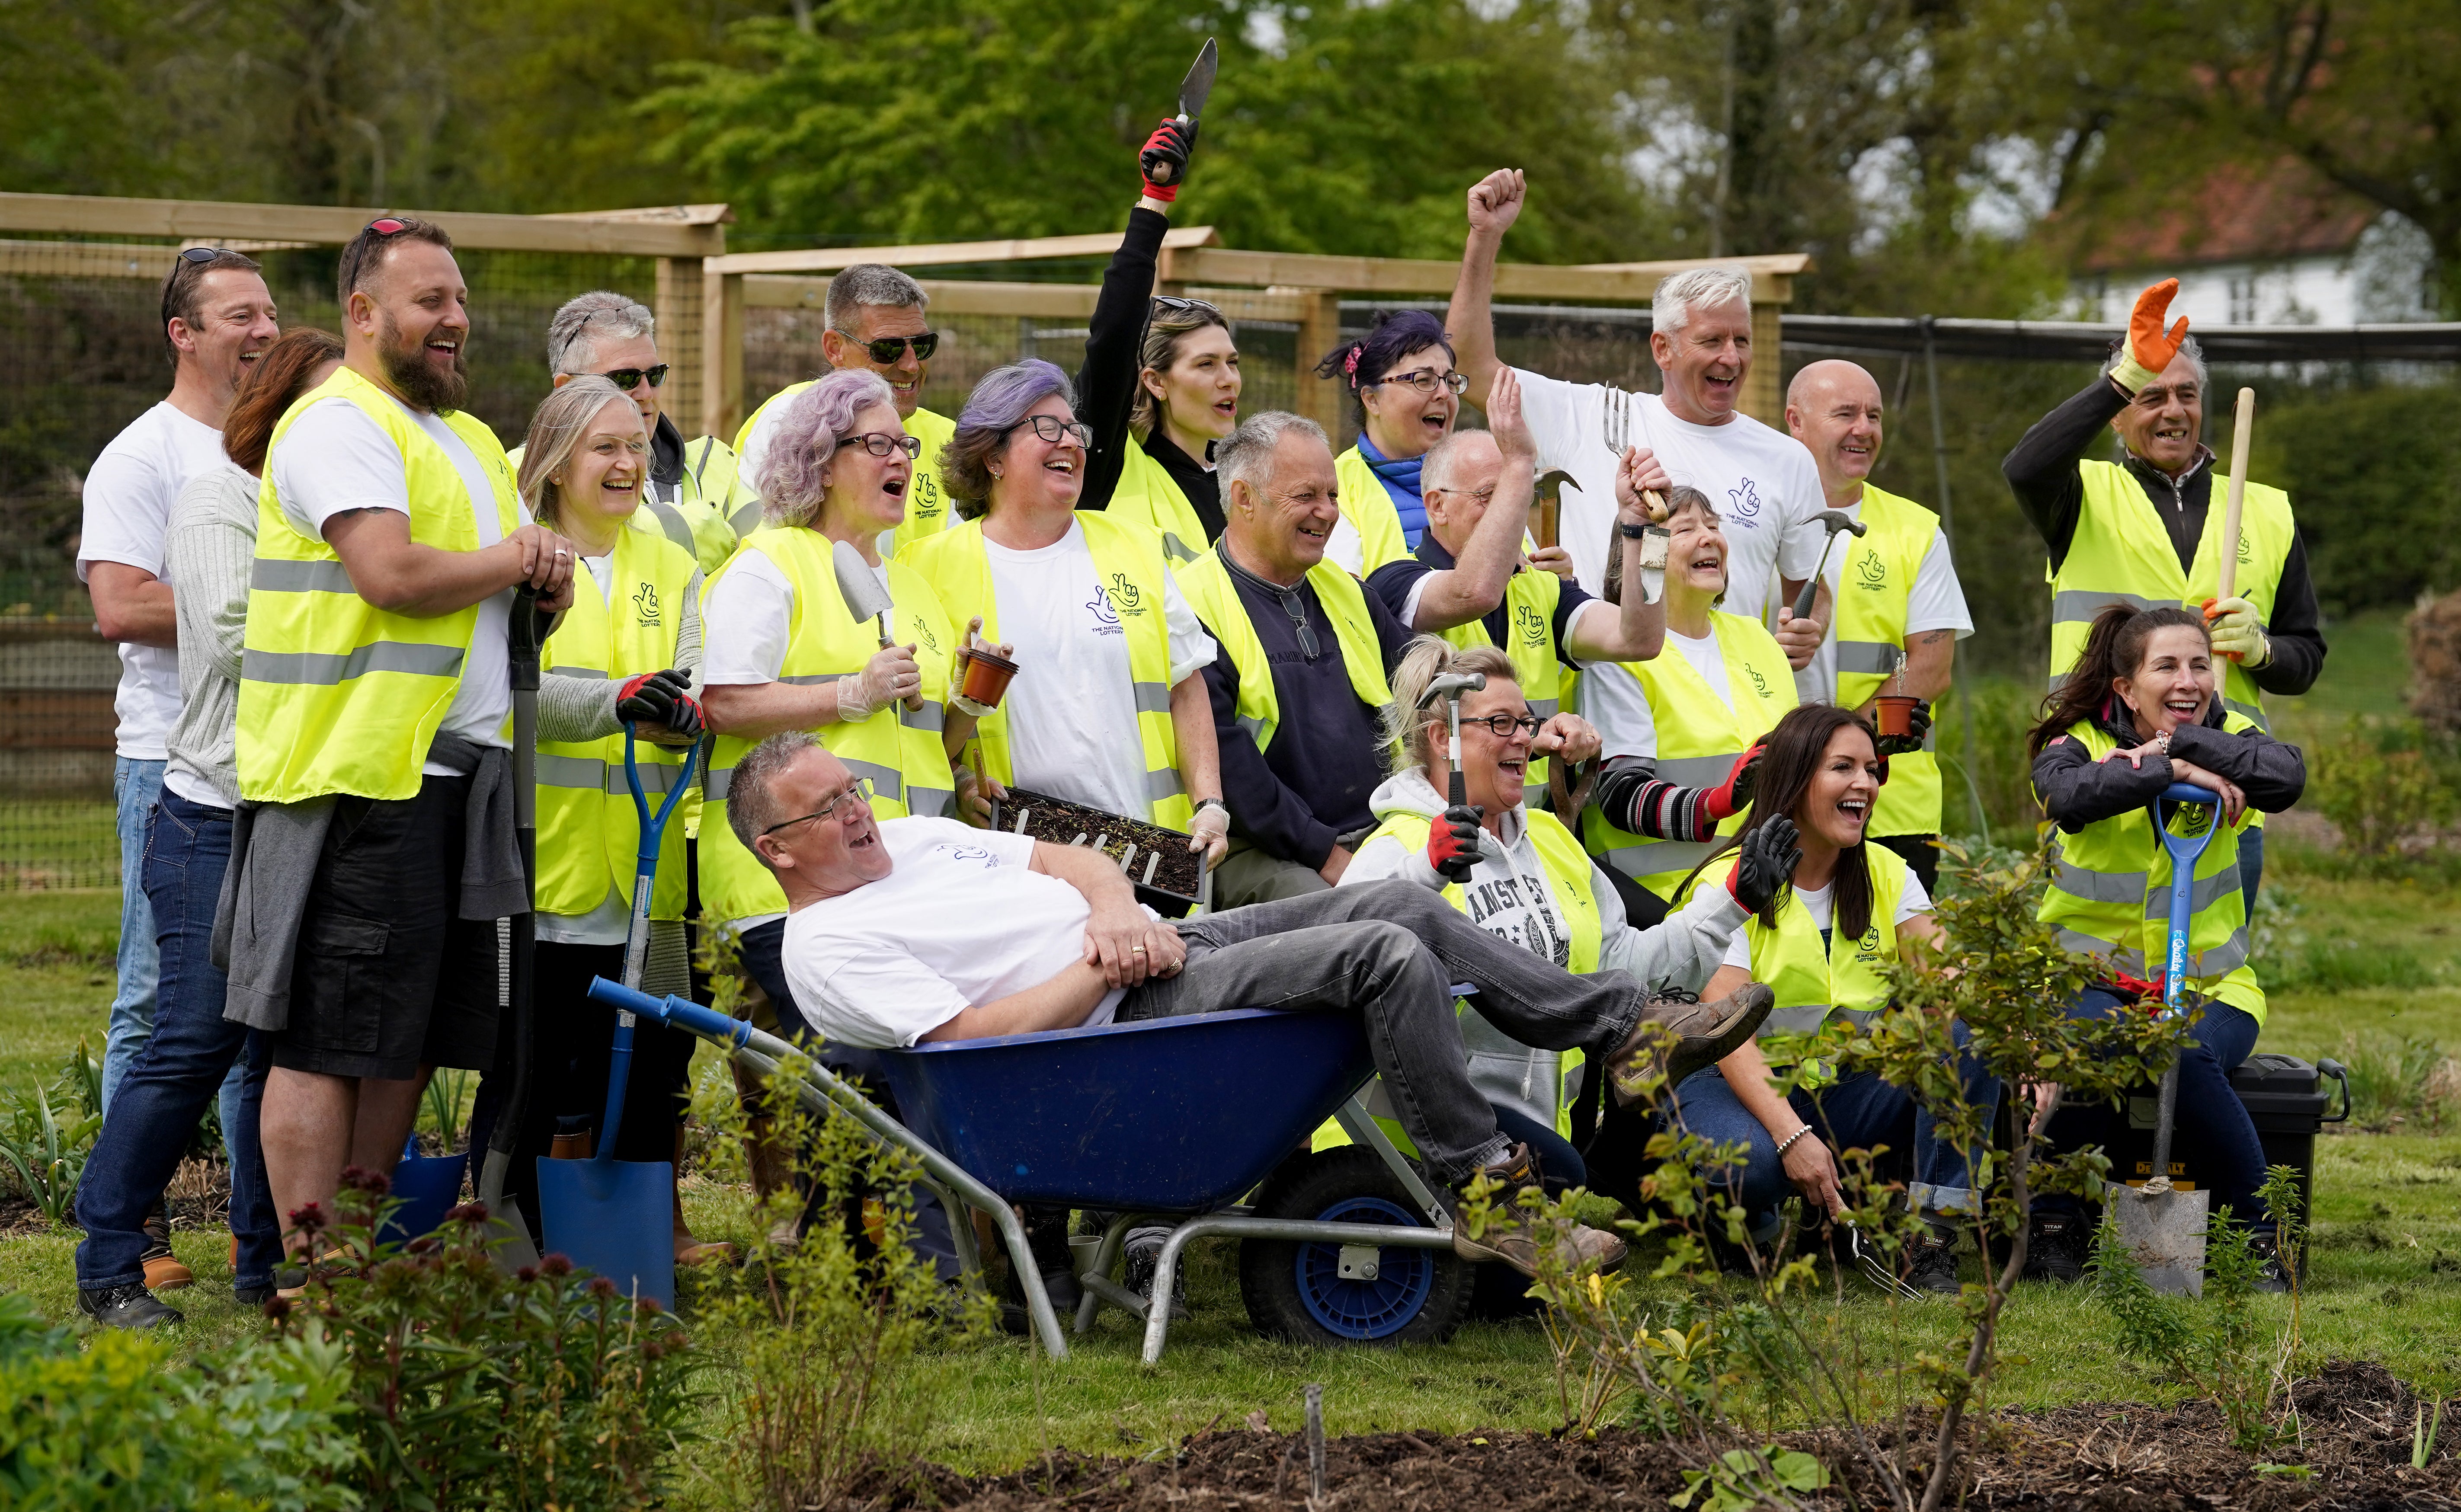 Twenty-one National Lottery winners, with a combined wealth of £146 million, help to lay paths and fences at Rocks Farm Oast, in Hastings, Sussex, after volunteering to help the Veterans’ Growth charity. Picture date: Thursday April 28, 2022 (Gareth Fuller/PA)